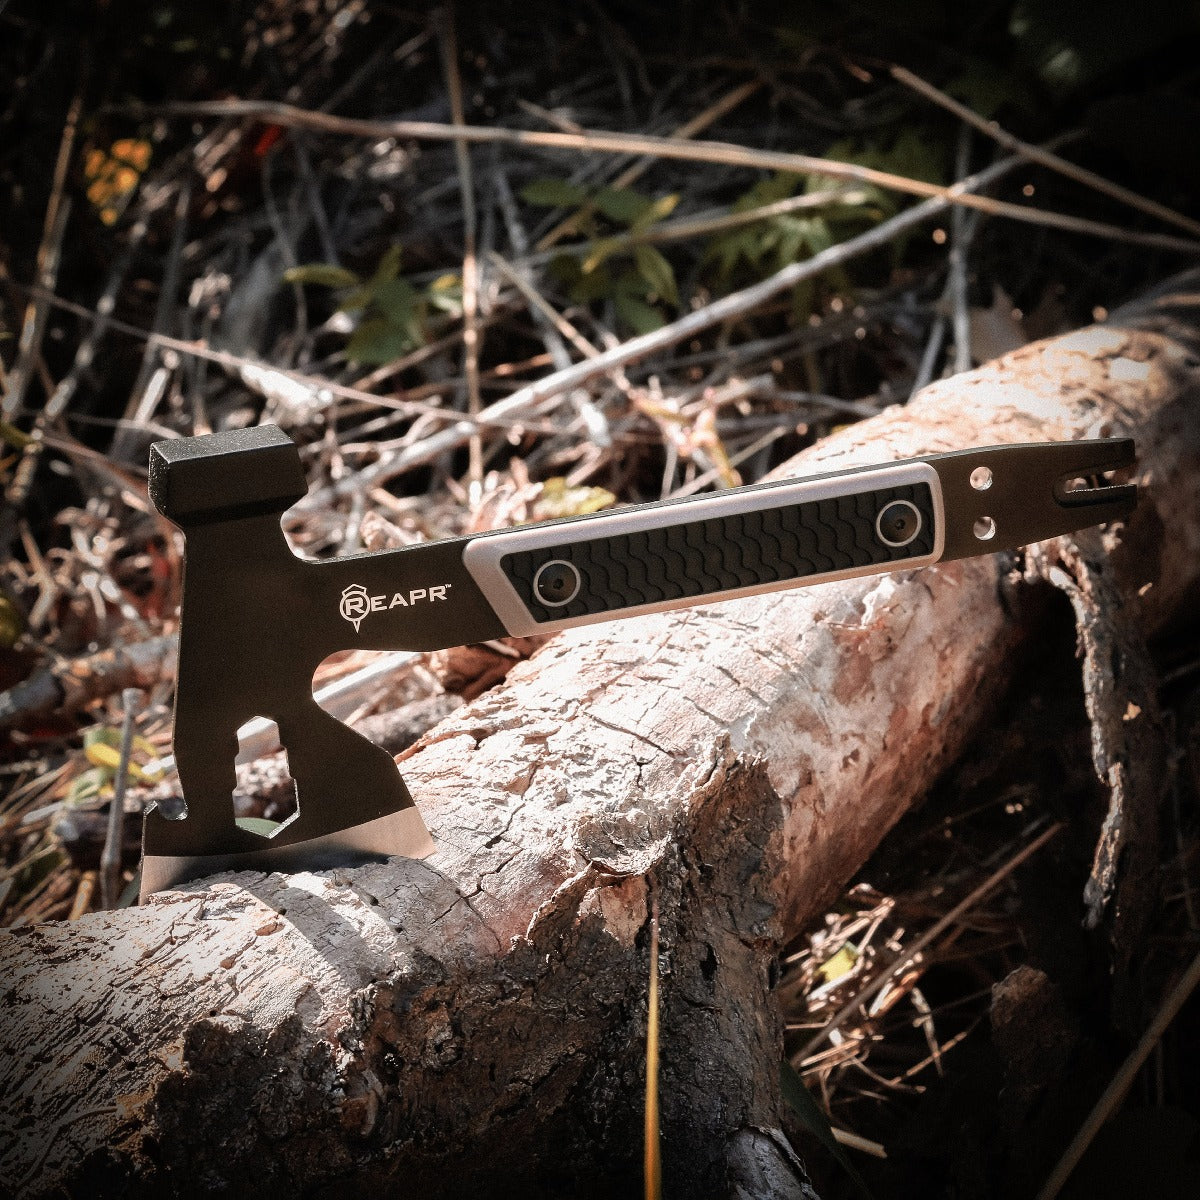 Similar to standard camping axes and hatchets in size, the Versa stands out from the pack to give you not only a 3″ axe head, but a 3-wrench set (10 mm, 13 mm, 16mm), cast hammer, pry bar, nail puller and a bottle opener. www.defenceqstore.com.au